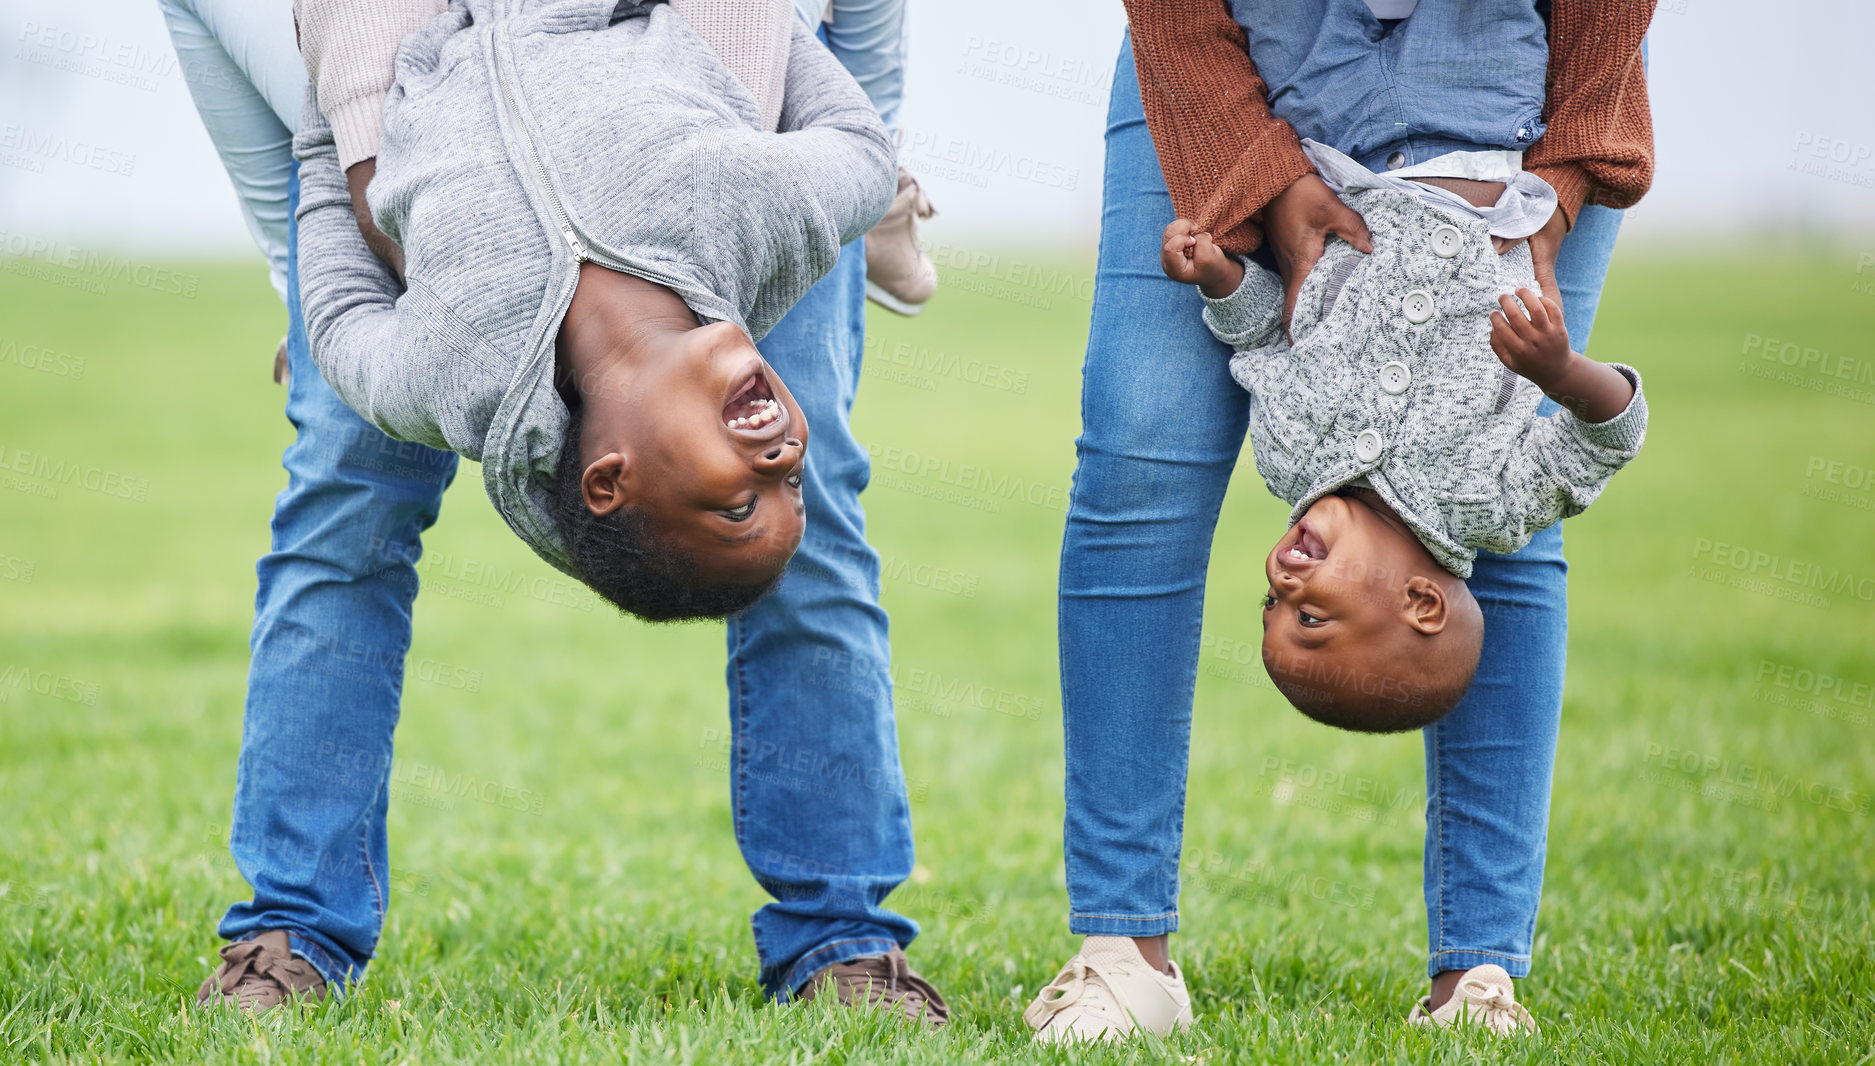 Buy stock photo Shot of two children hanging upside down by their parents outside